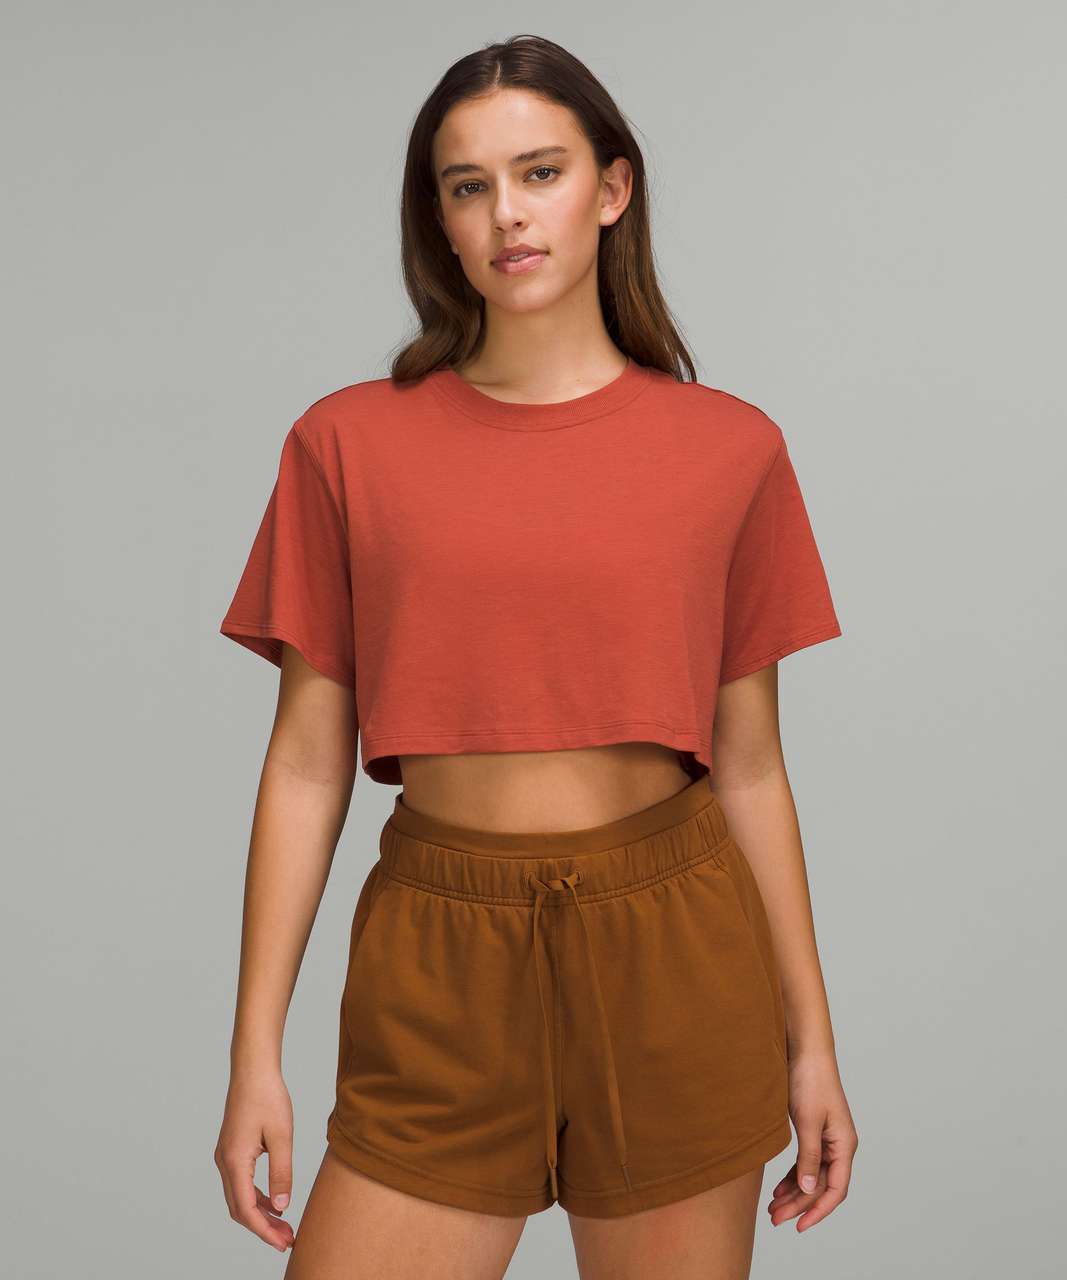 Lululemon All Yours Cropped T-Shirt - Red Rock